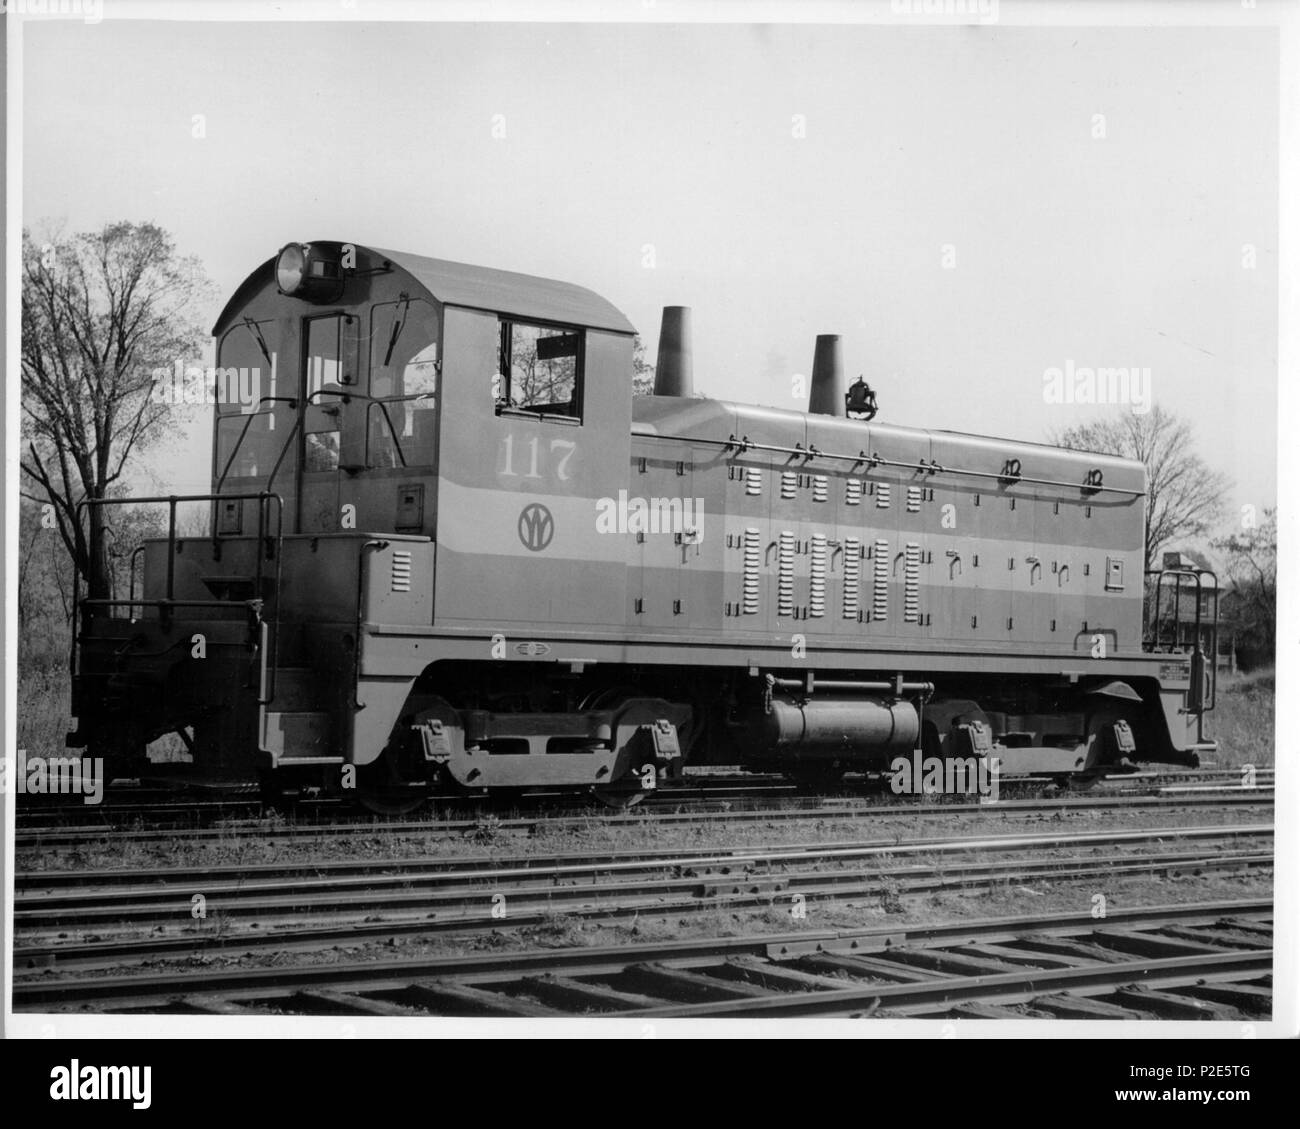 . Collection: De Forest Douglas Diver Railroad Photographs, ca. 1870 - 1948, Cornell University Library Title: O&W Diesel 117 Place: New York (State) Medium: Gelatin silver print Notes: See also ID Number RMC2004 1231 Provenance: Diver, De Forest Douglas, 1878-1958, Collector Finding Aid: <a href='http://rmc.library.cornell.edu/EAD/htmldocs/RMM01948.html' rel='nofollow'>http://rmc.library.cornell.edu/EAD/htmldocs/RMM01948.html</a> Location: 1948/Box 5/folder 230 RMC ID: RMC2004 1230 Persistent URI: <a href='http://hdl.handle.net/1813.001/5xzp' rel='nofollow'>http://hdl.handle.net/1813.001/5xzp Stock Photo